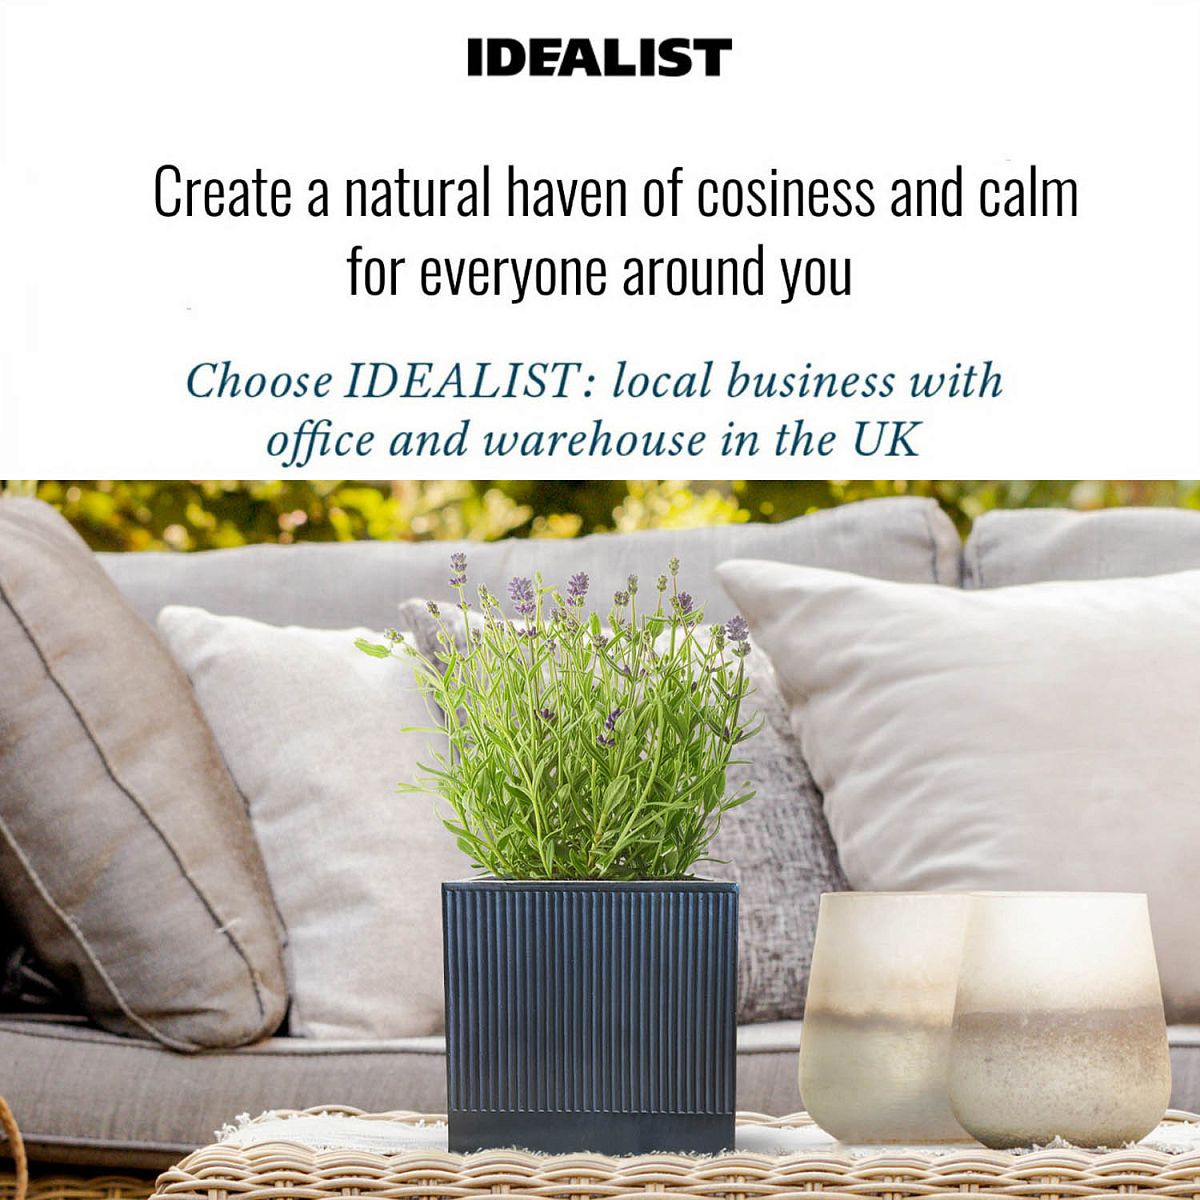 IDEALIST Lite Ribbed Square Outdoor Planter